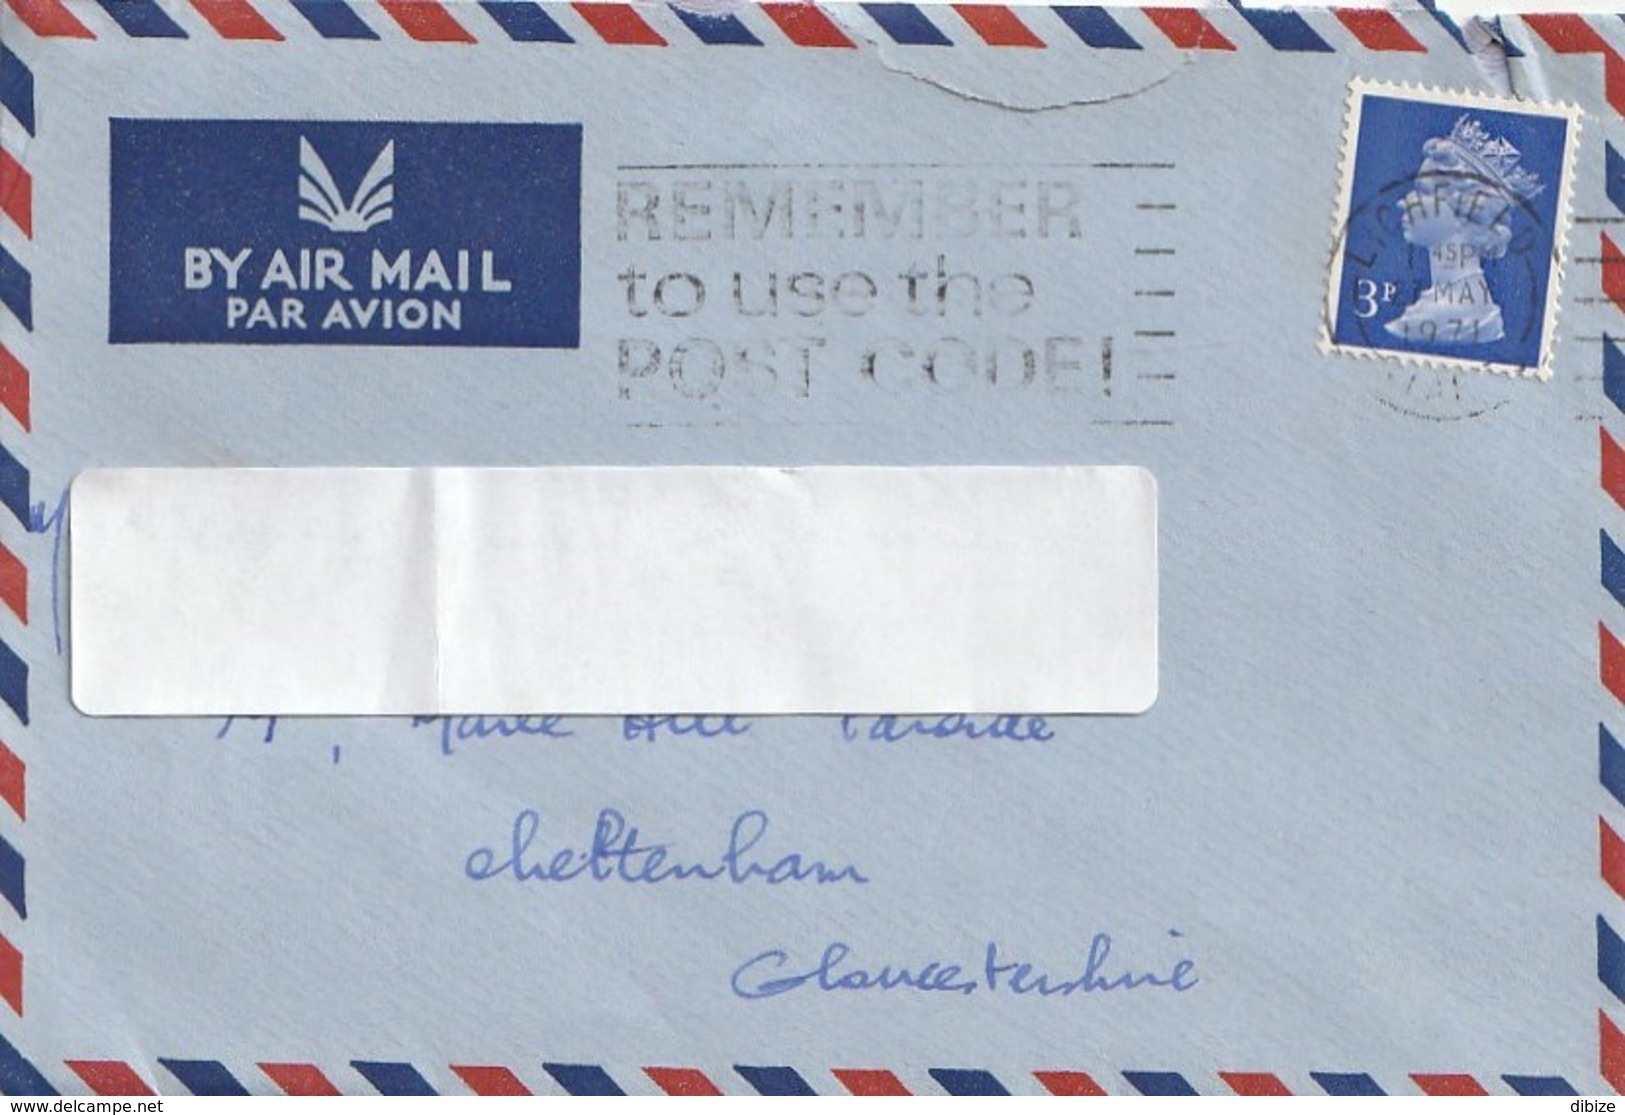 Letter  Circulated. United Kingdom. Air Mail. Stamp. Postmark Southampton. 1971. Average Condition. Tear In The Back. - Postmark Collection